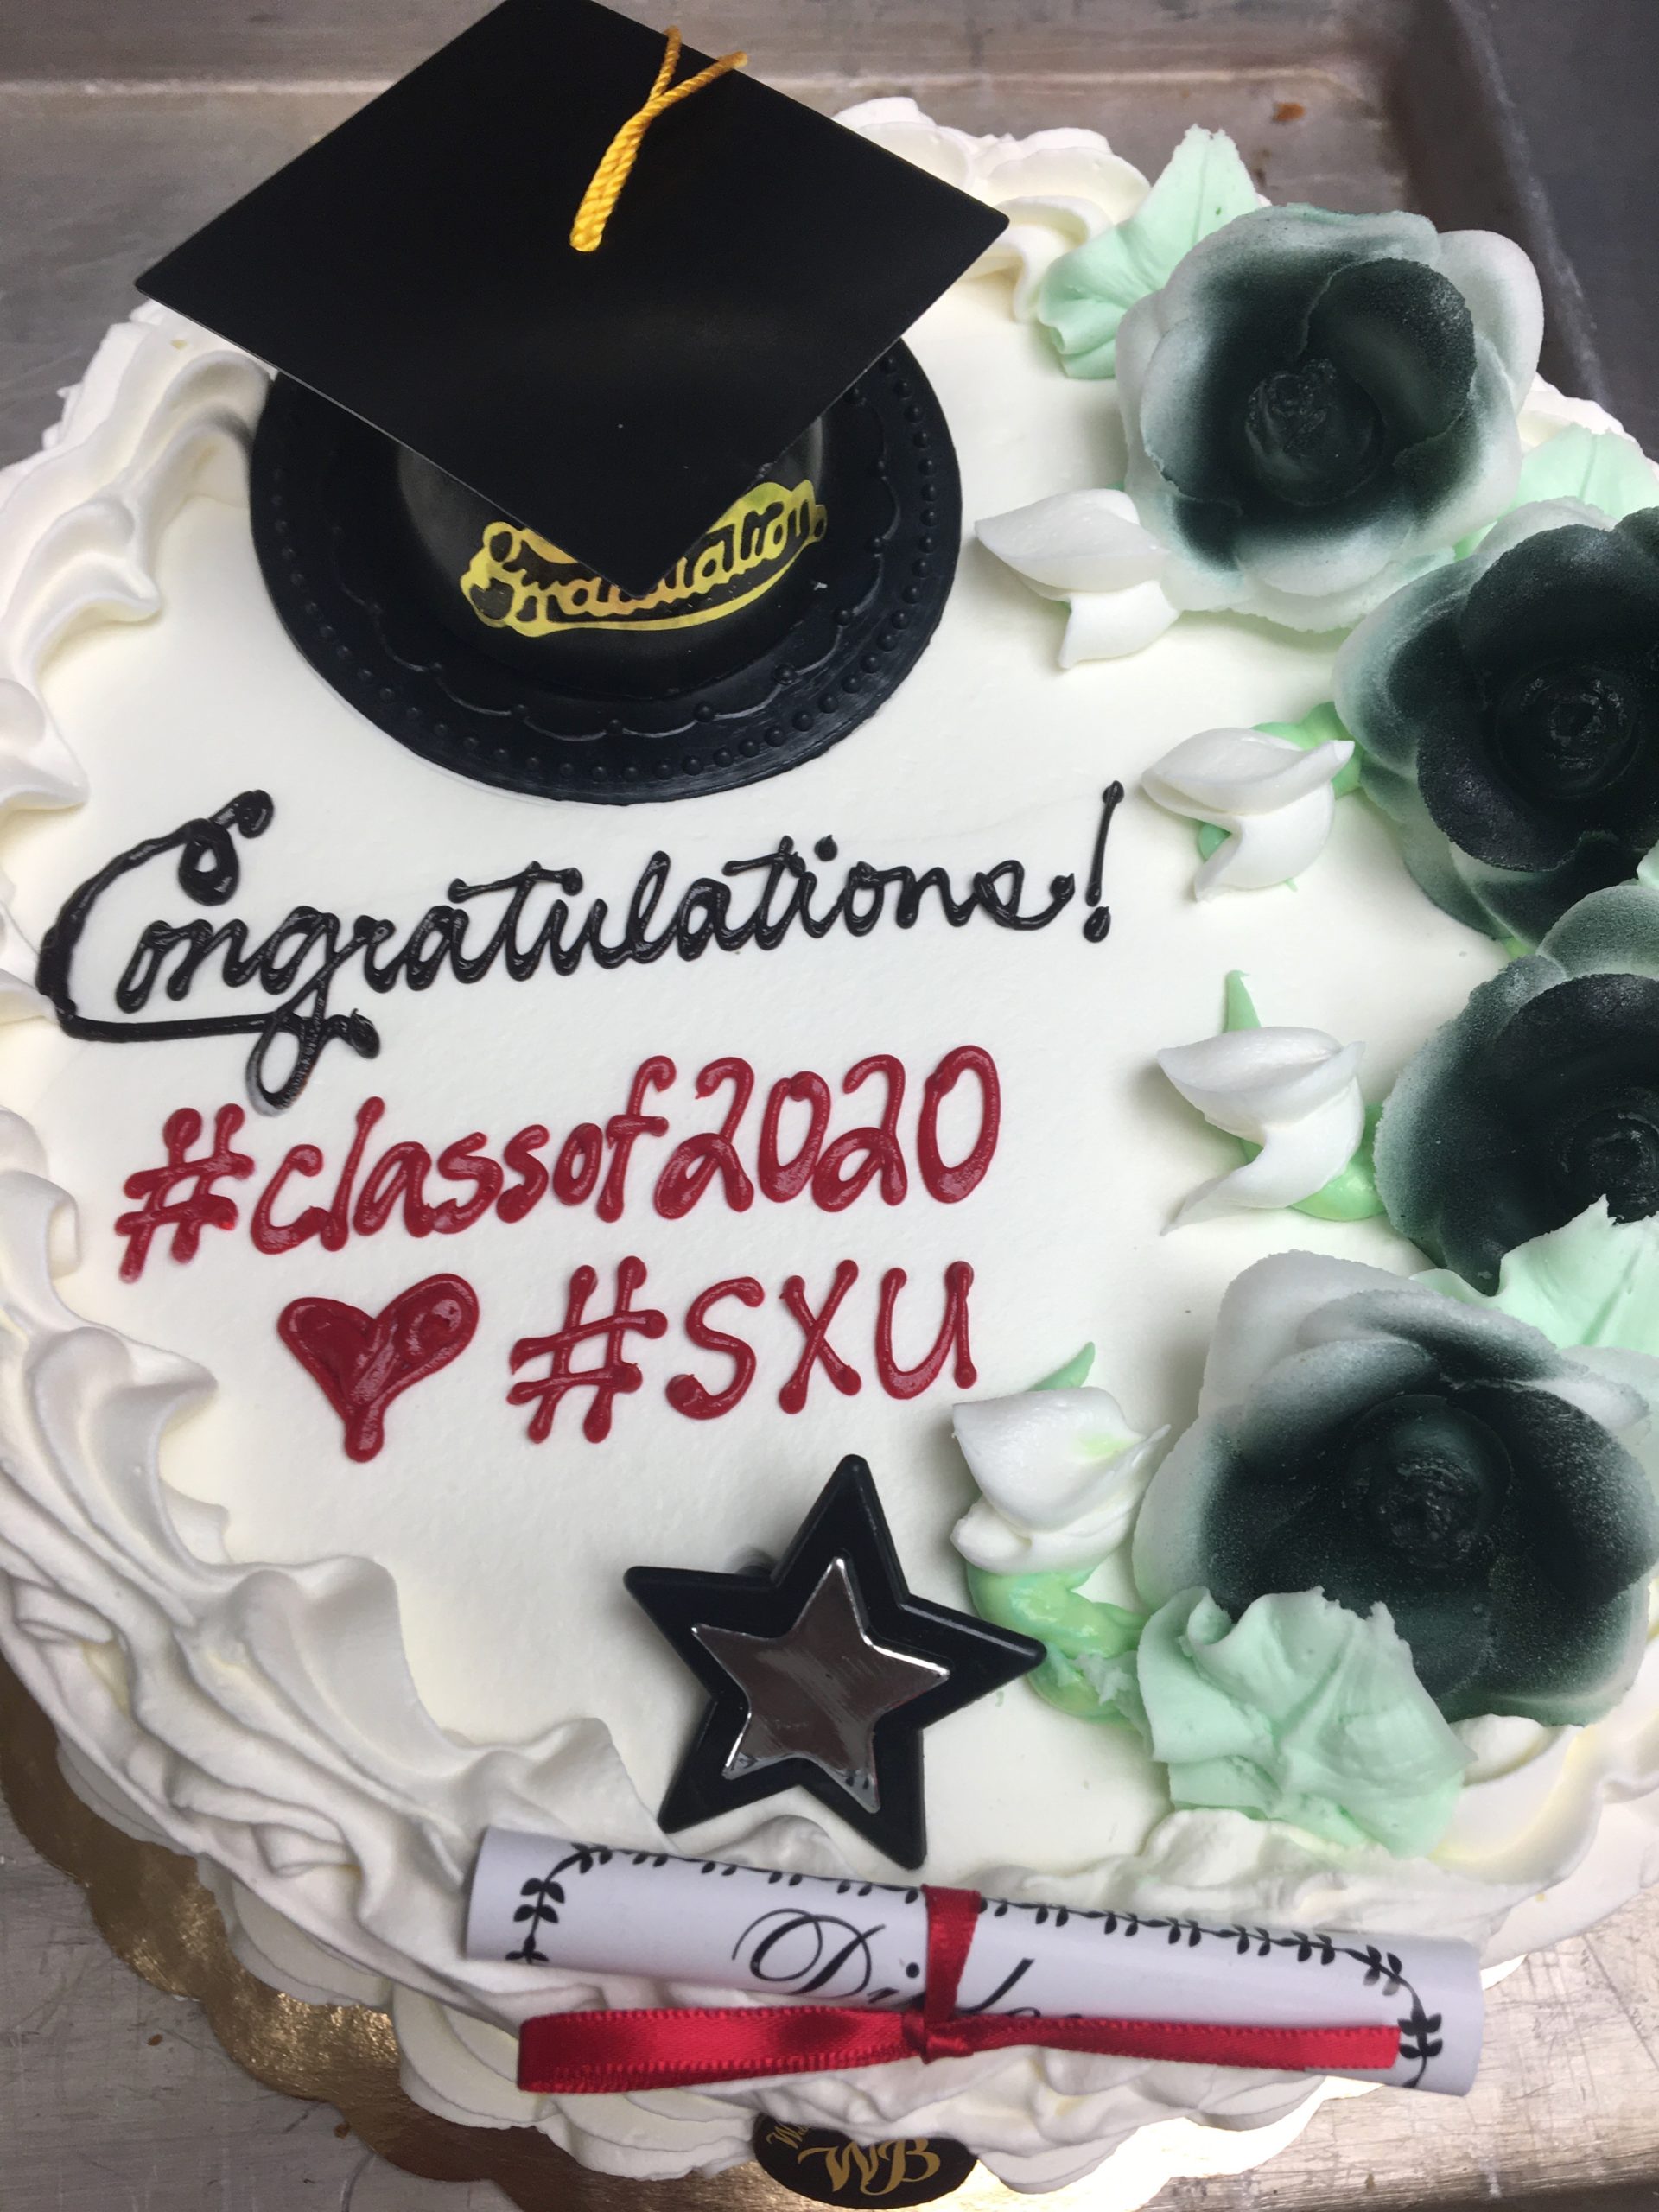 Classic cake with black cap and diploma